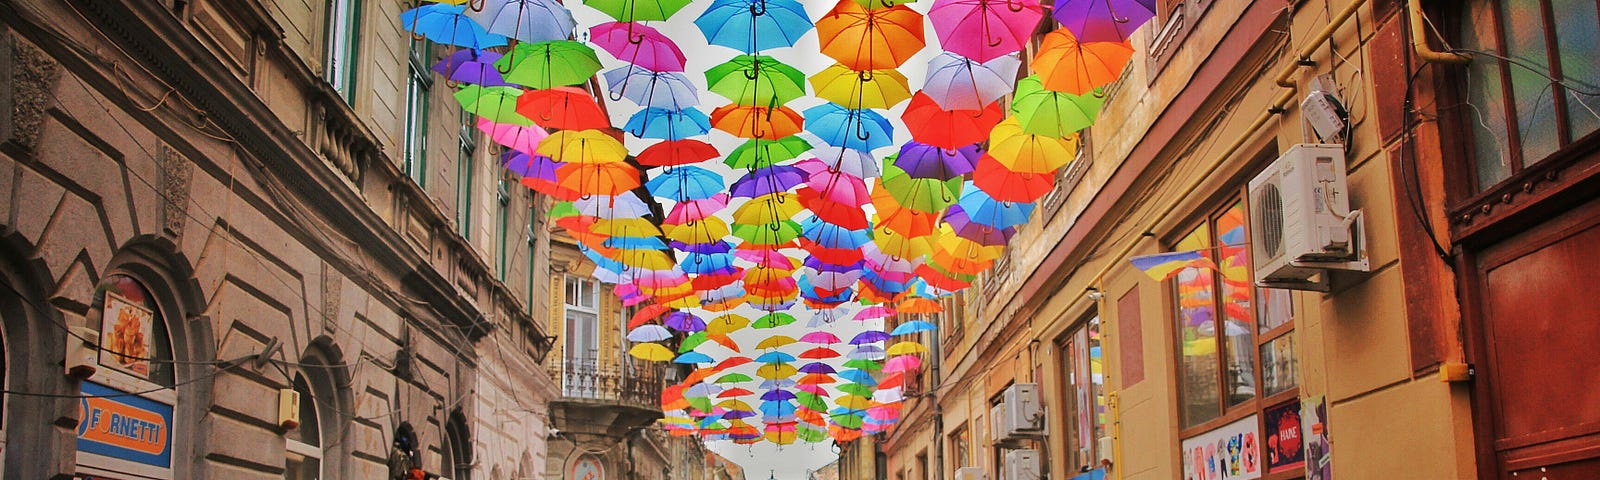 A European city filled with colourful umbrellas